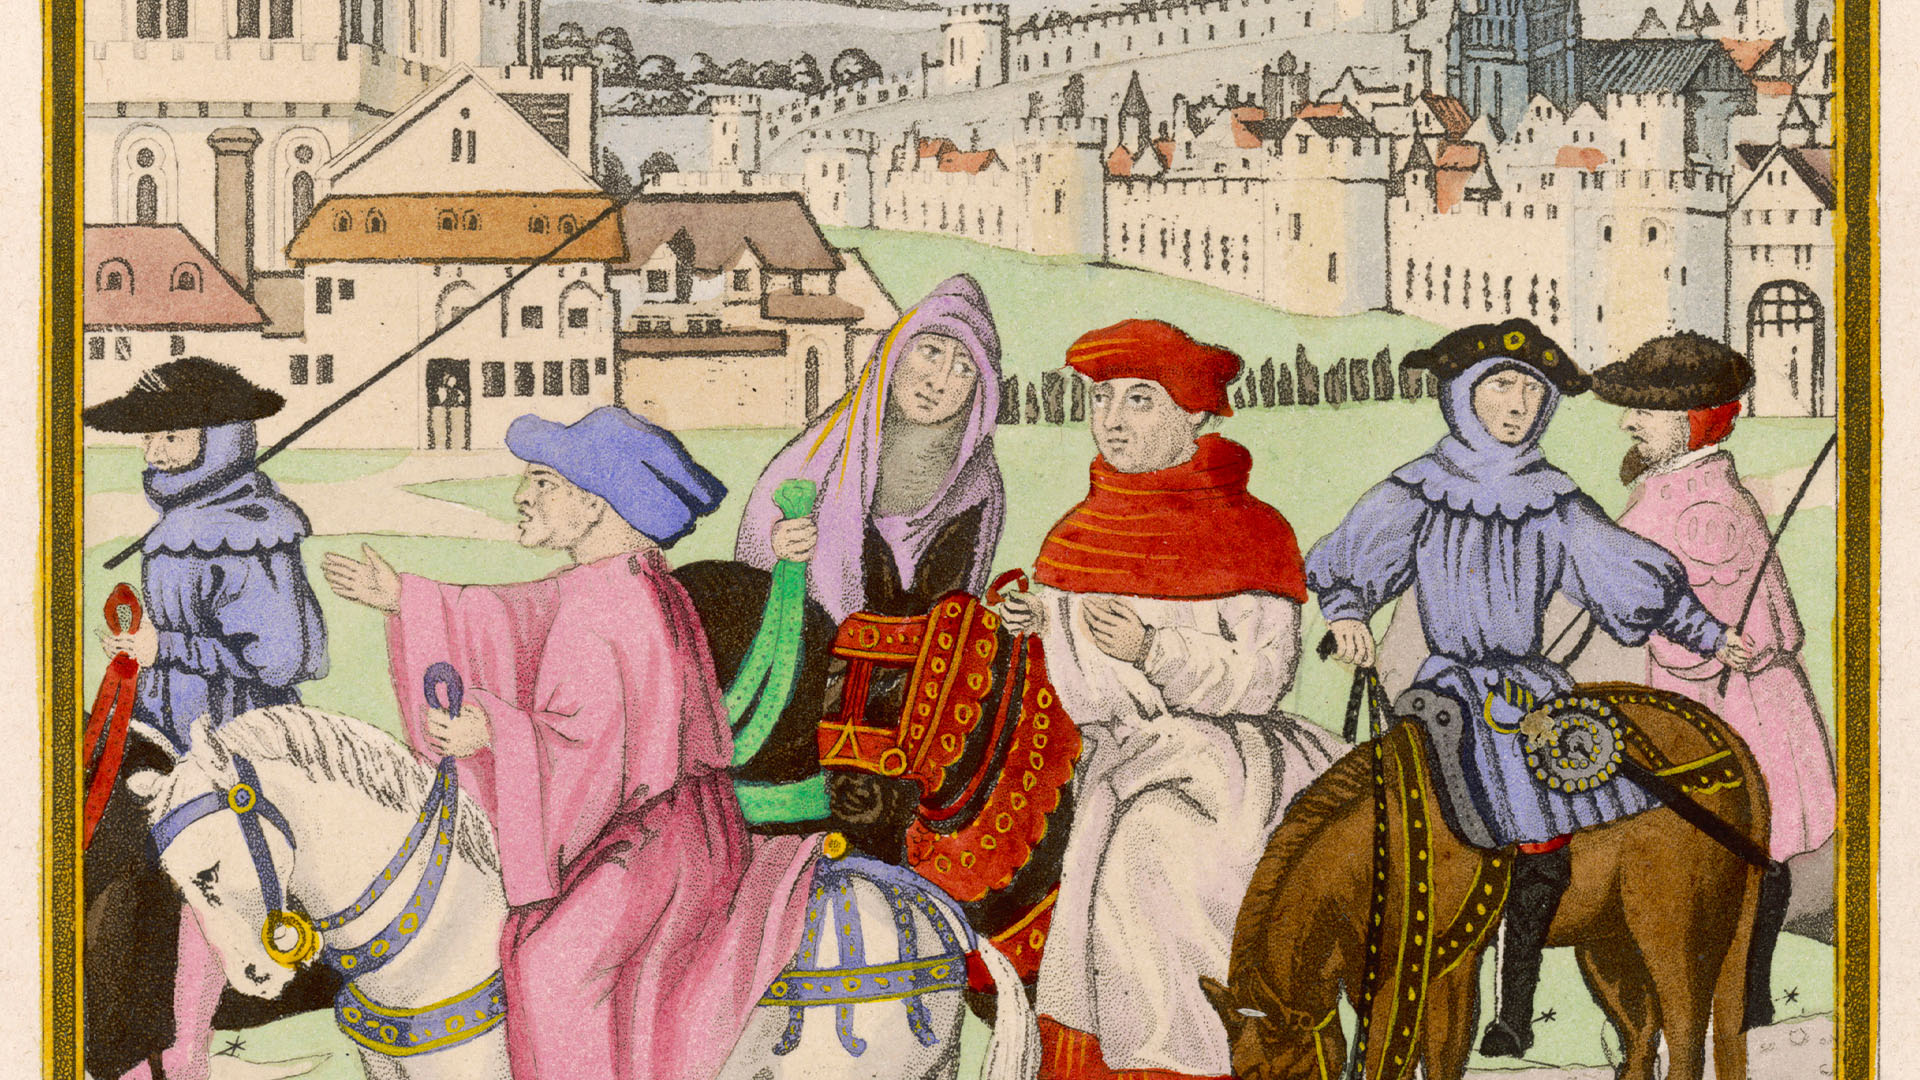 Chaucer and the Canterbury pilgrims